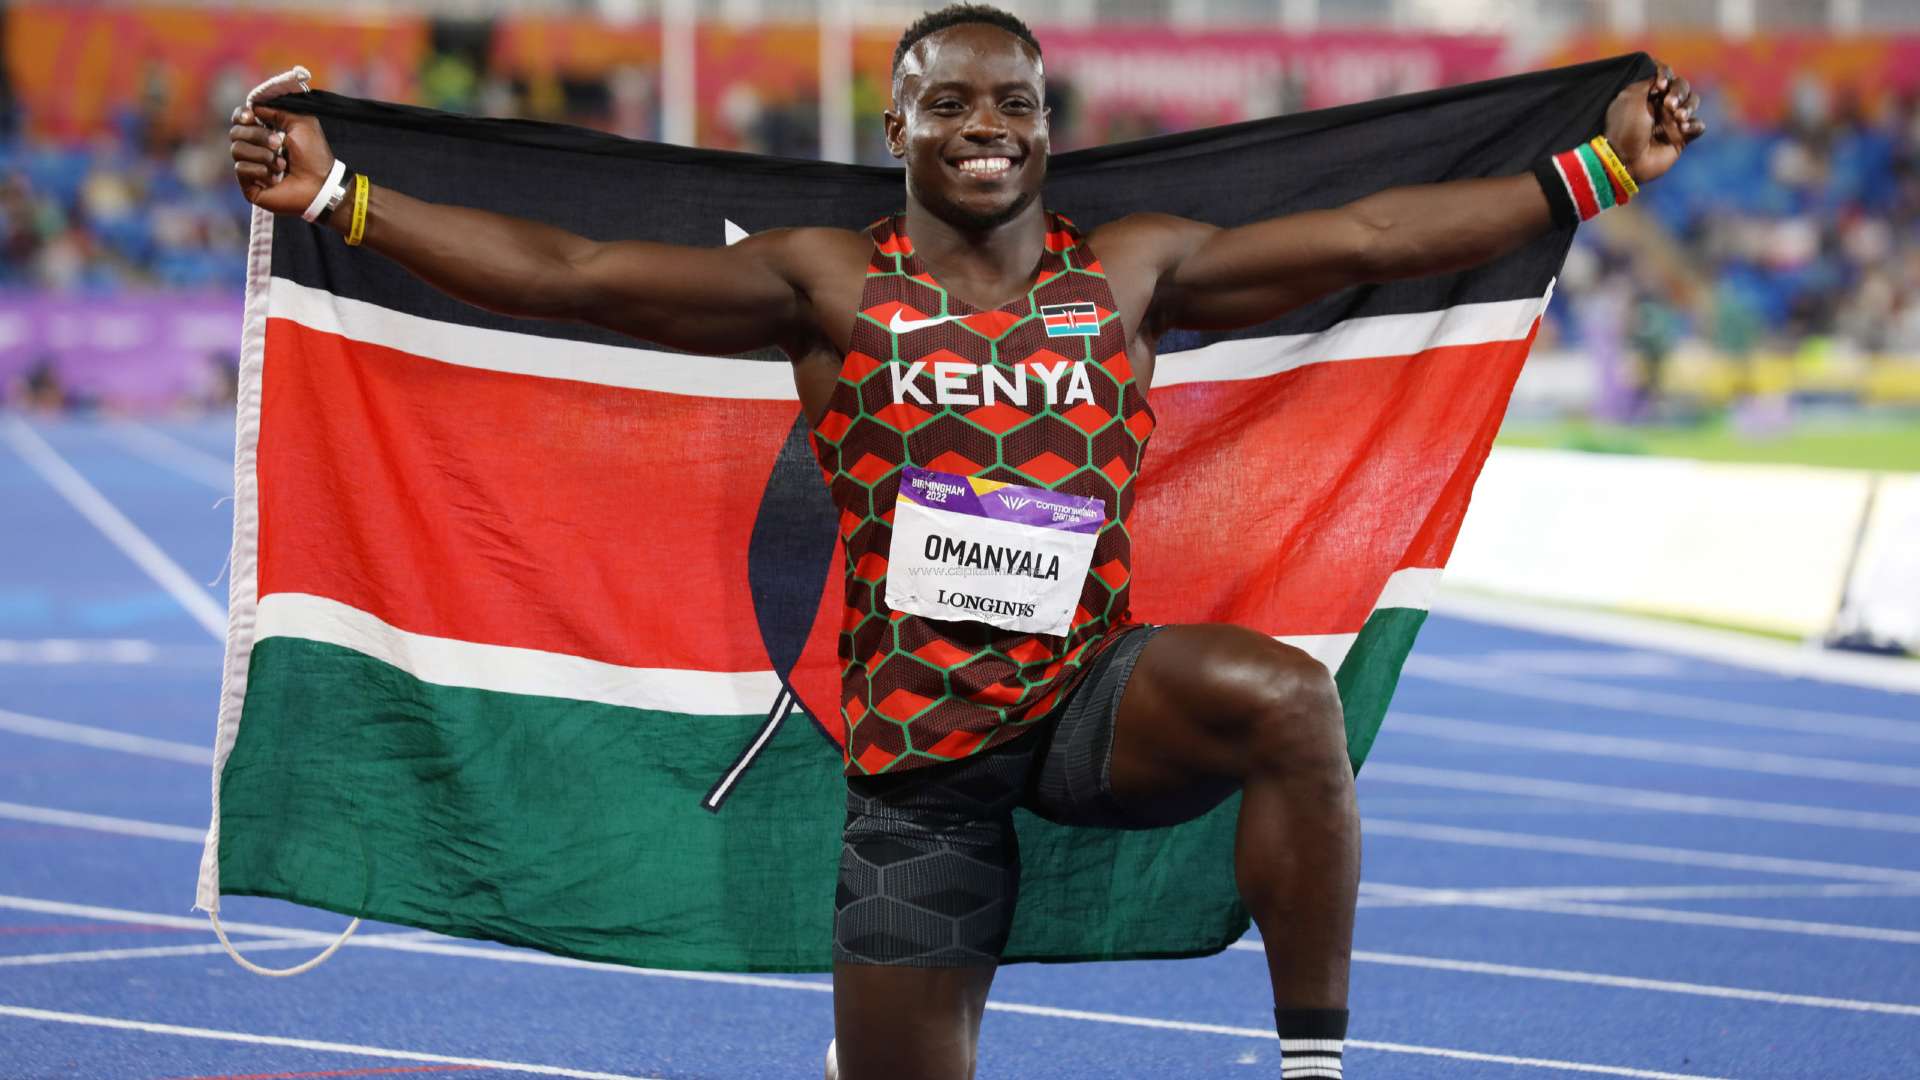 Ferdinand Omanyala after becoming the Commonwealth Games 2022 champion in 100 meters (Image Credits - Twitter)